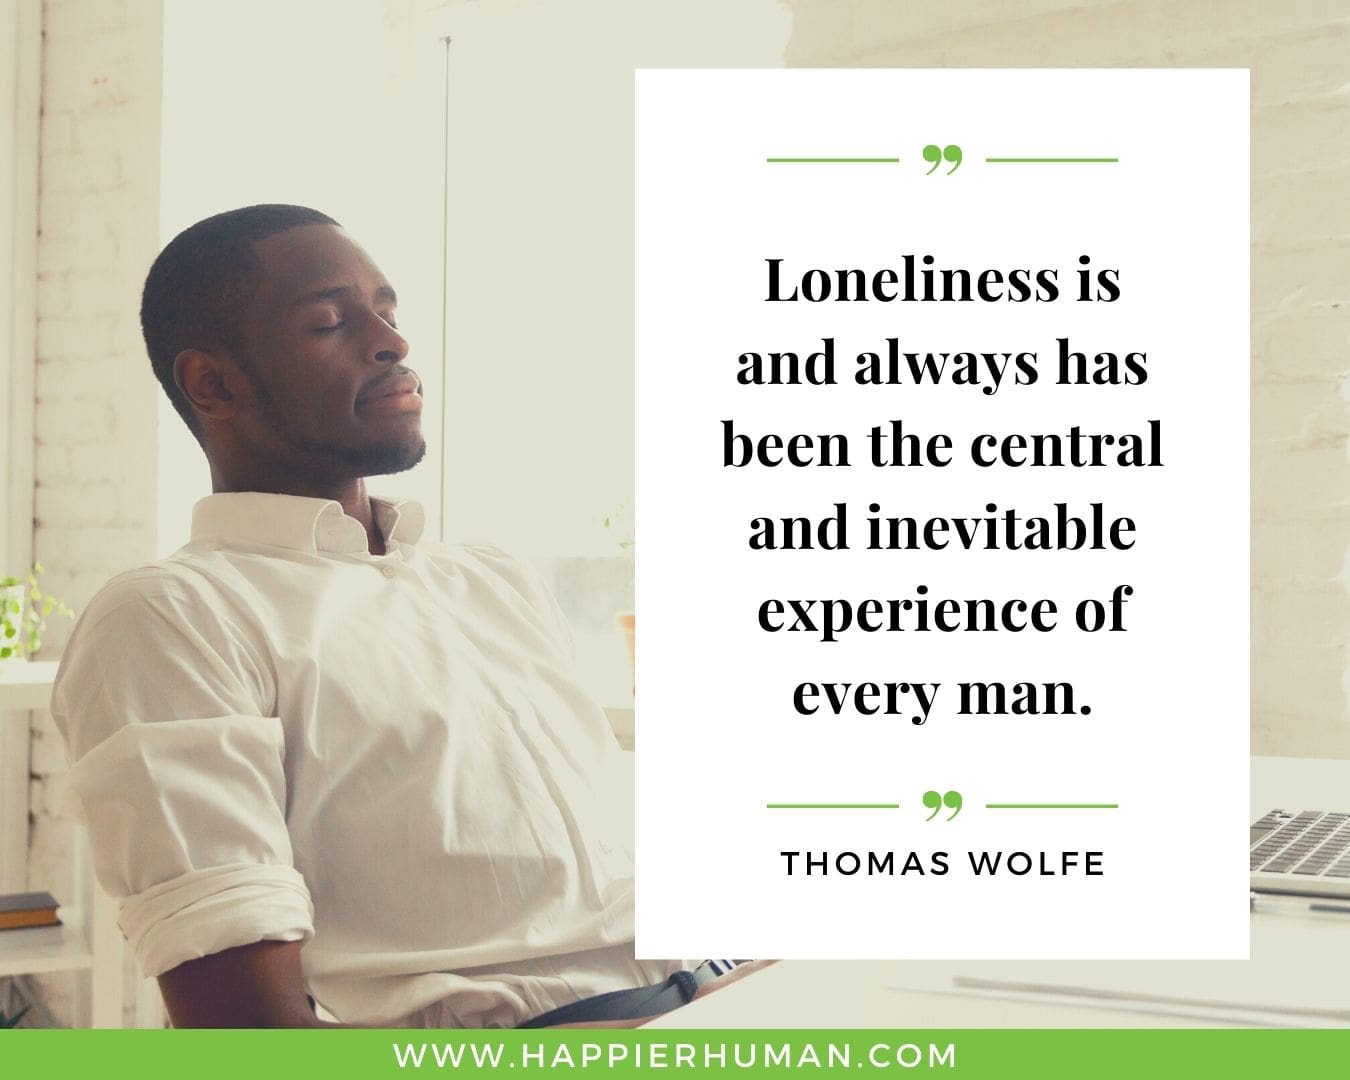 Loneliness Quotes - “Loneliness is and always has been the central and inevitable experience of every man.”– Thomas Wolfe